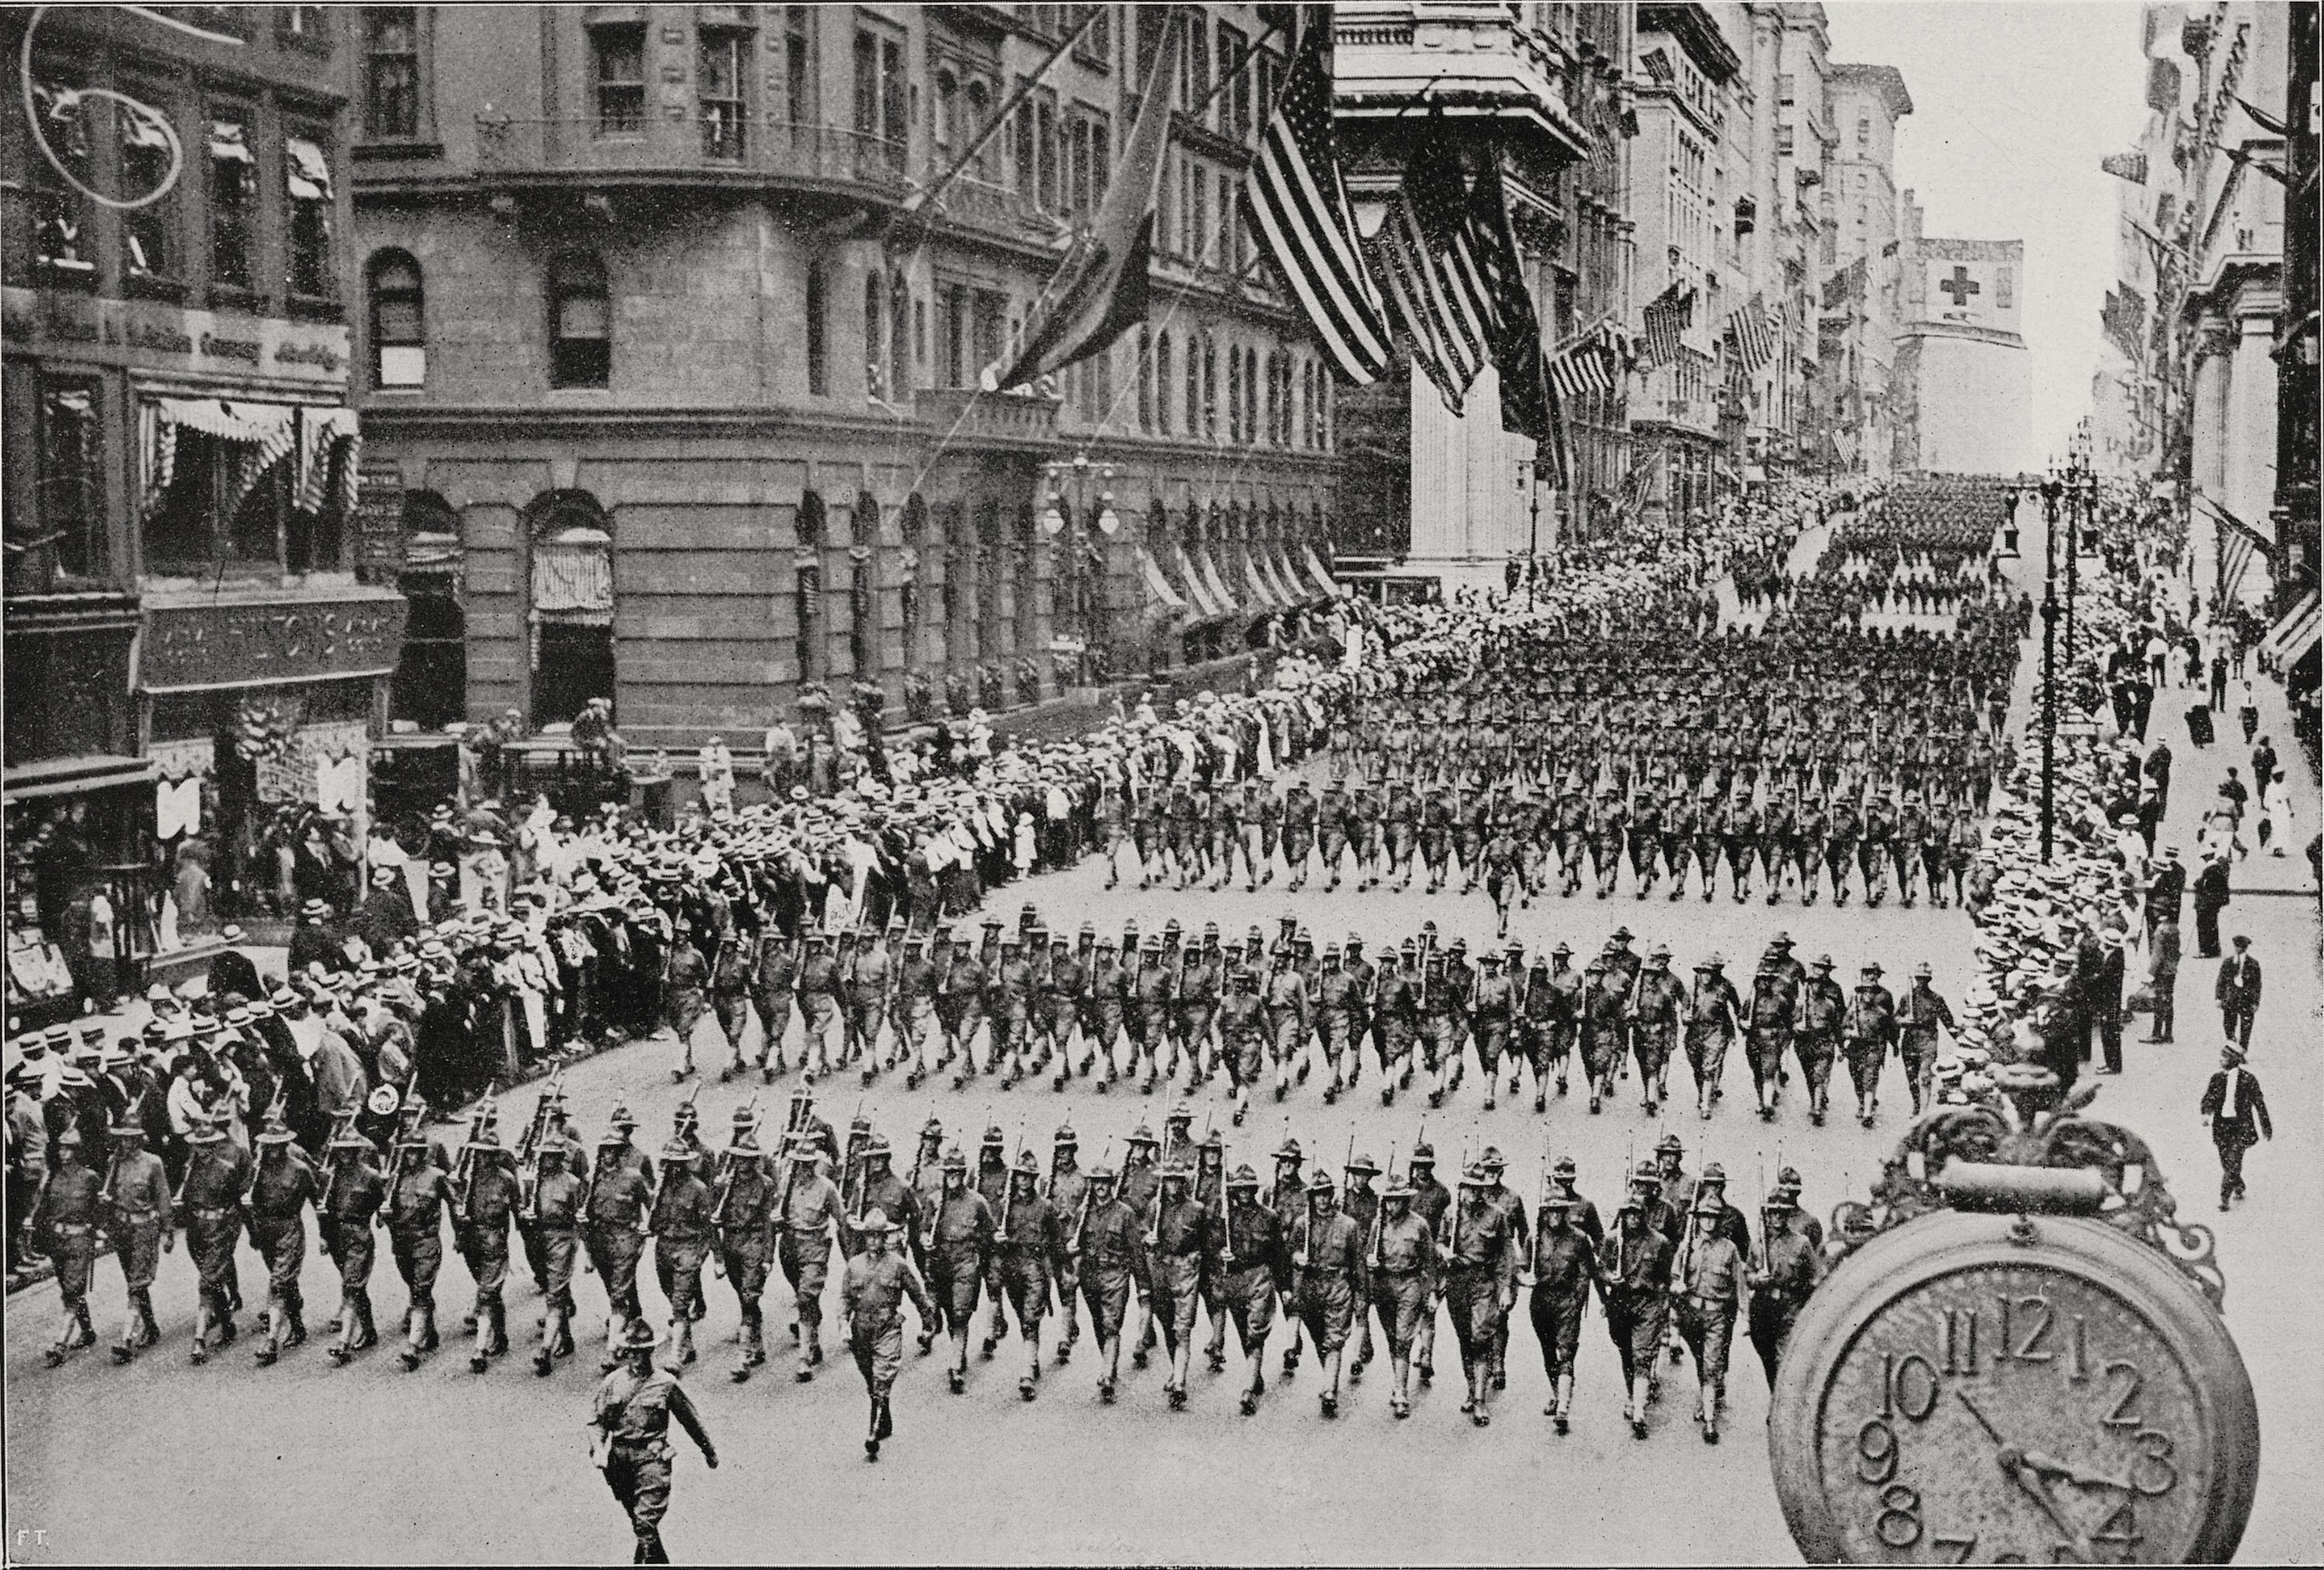 American regiments parading before departing